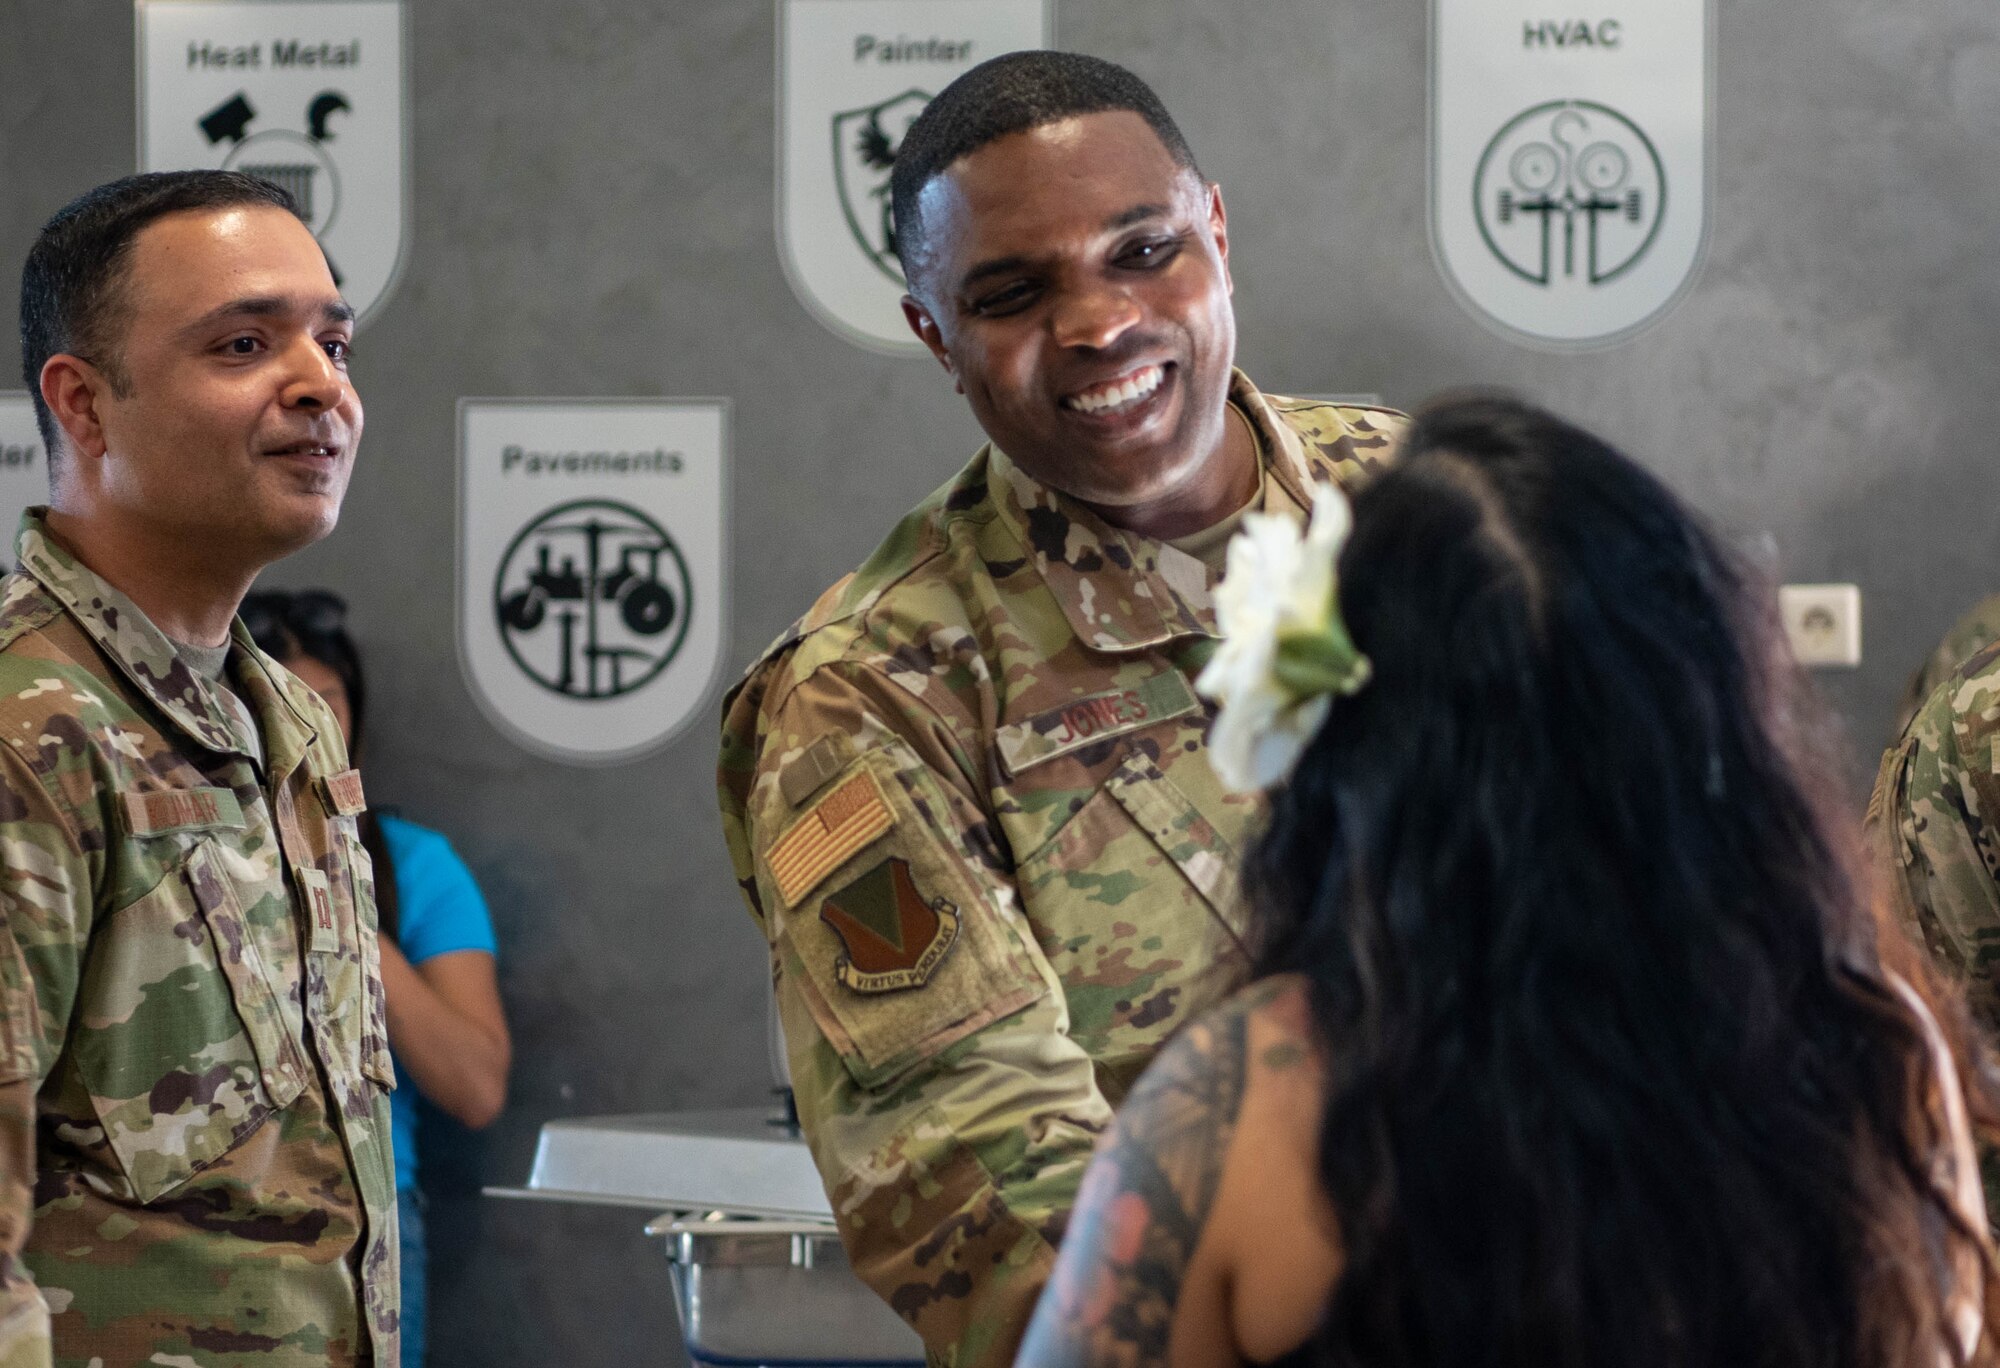 U.S. Air Force Brig. Gen. Otis C. Jones, 86th Airlift Wing commander, greets a performer at the Asian American and Pacific Islander Heritage Month closing ceremony at Ramstein Air Base, Germany